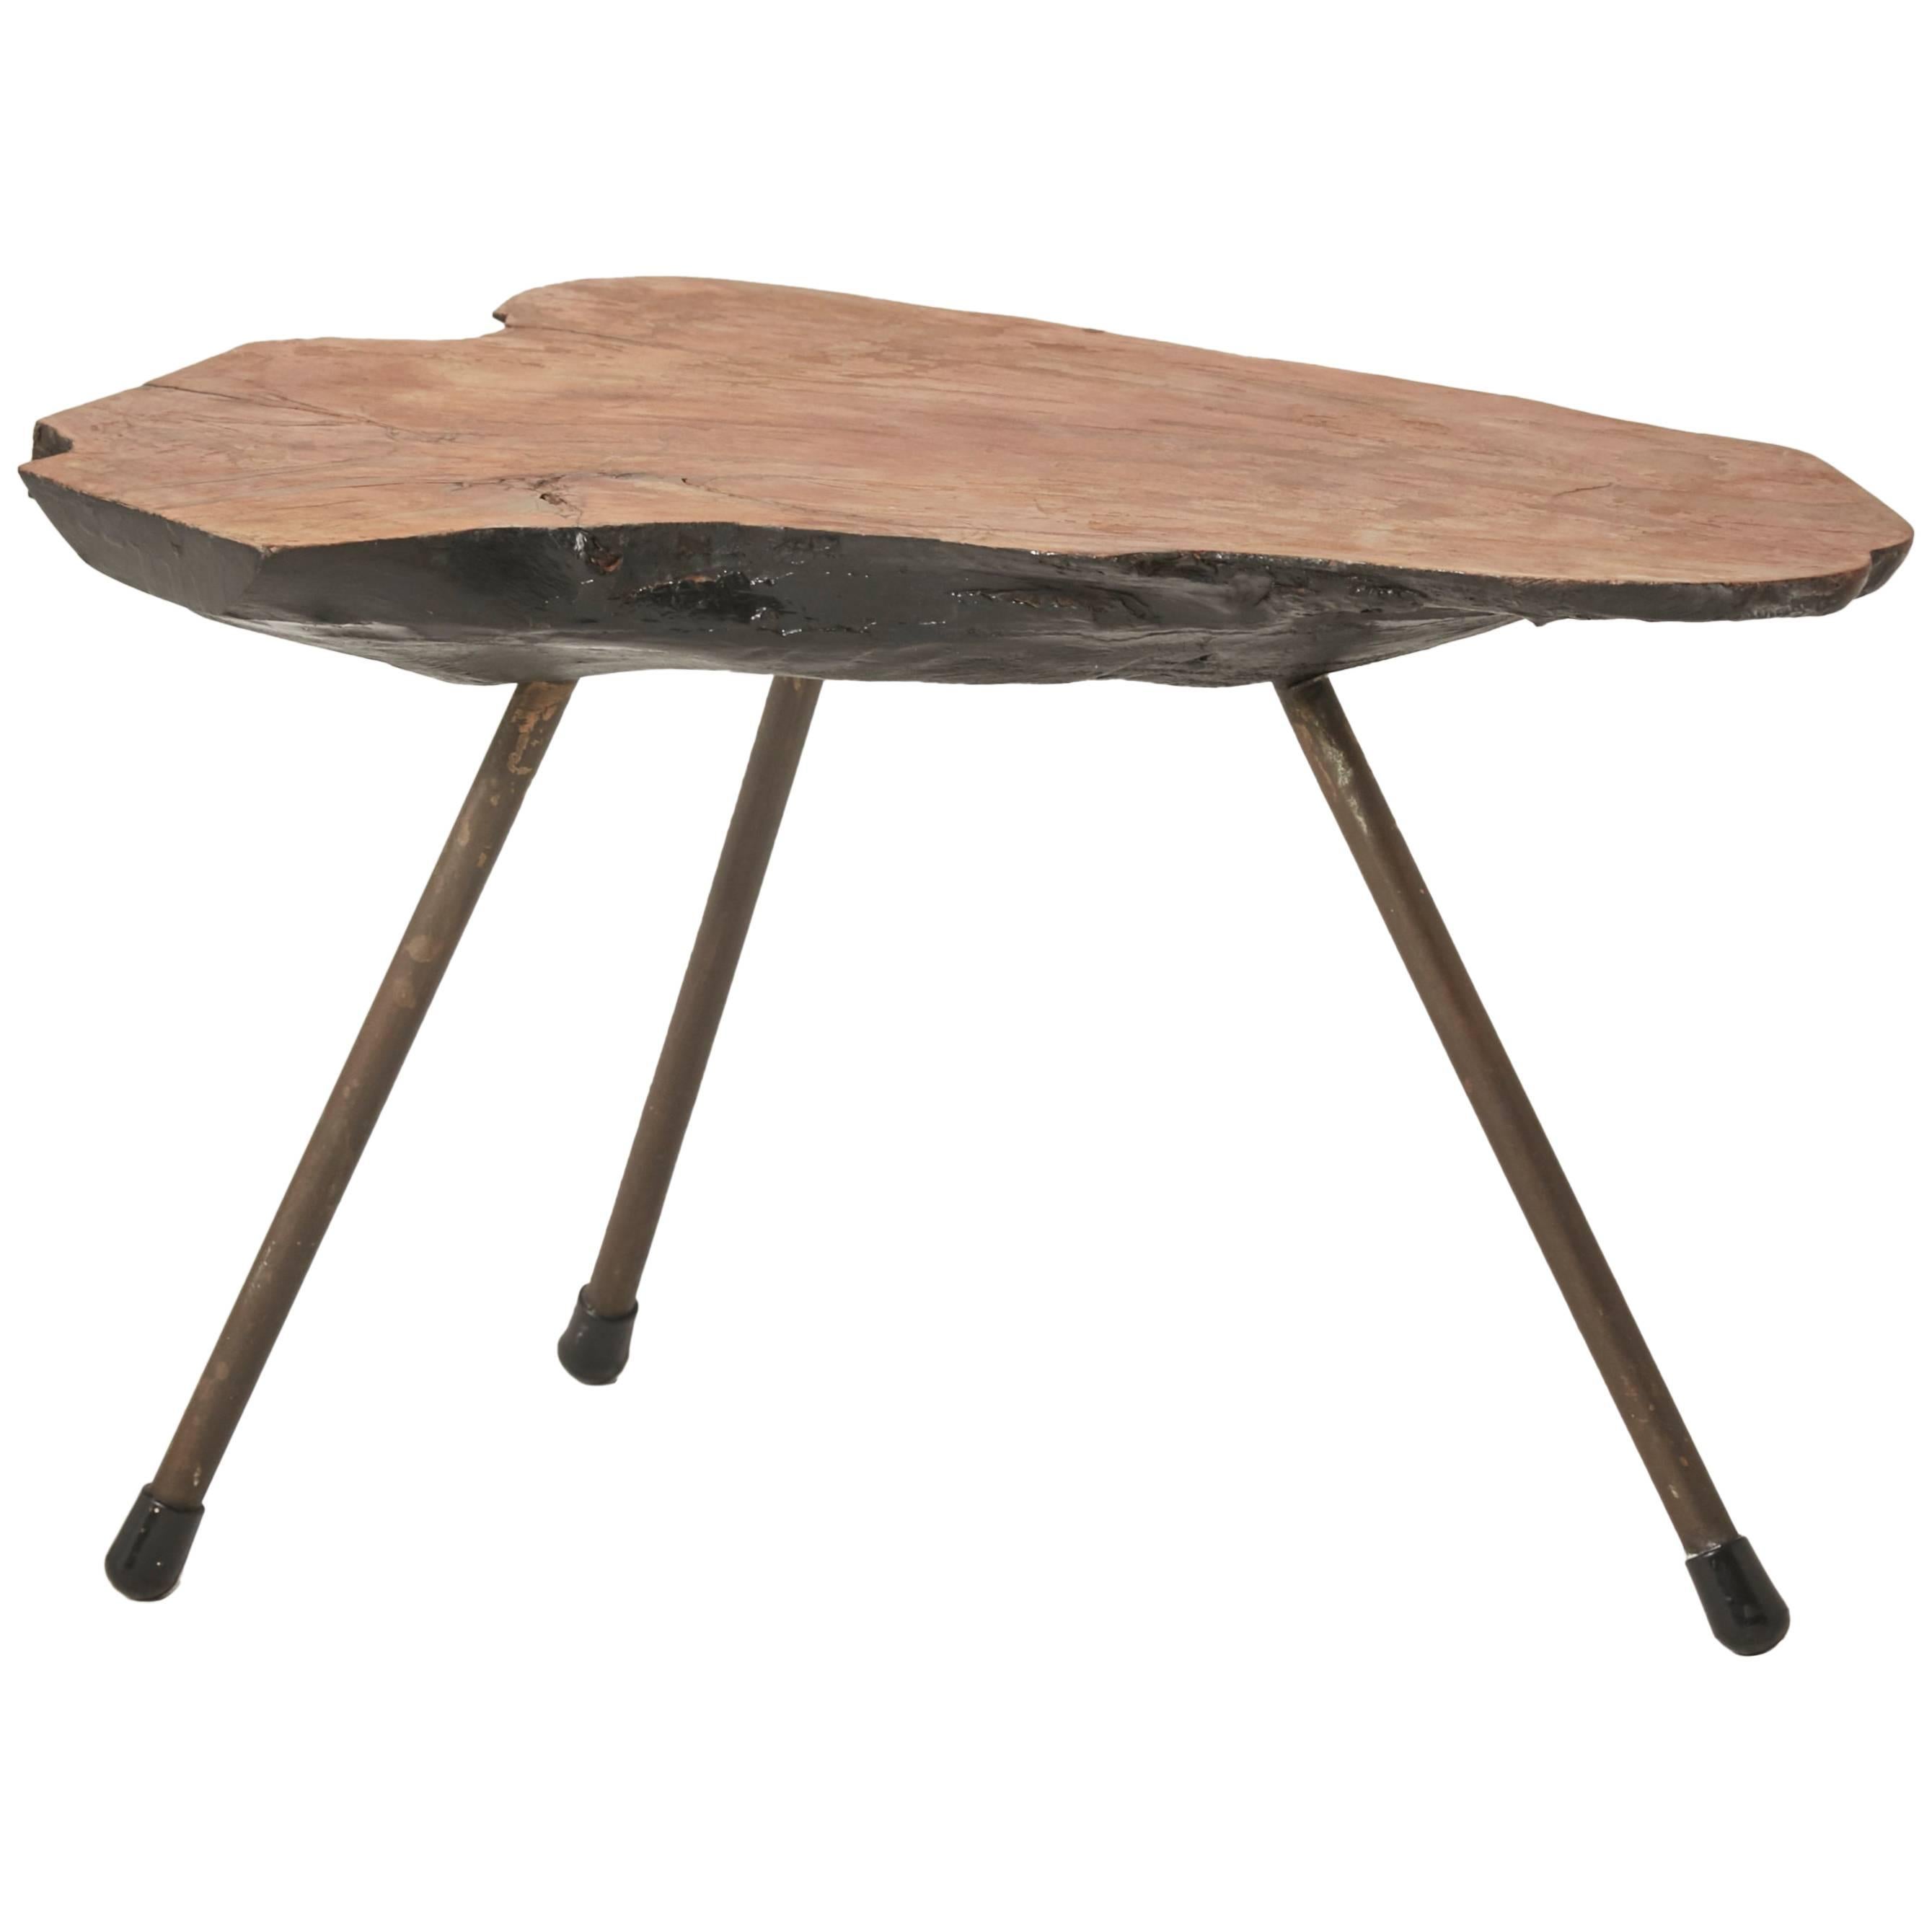 Small Midcentury Tree Trunk Table Attributed to Carl Aubock, Austria, 1950s